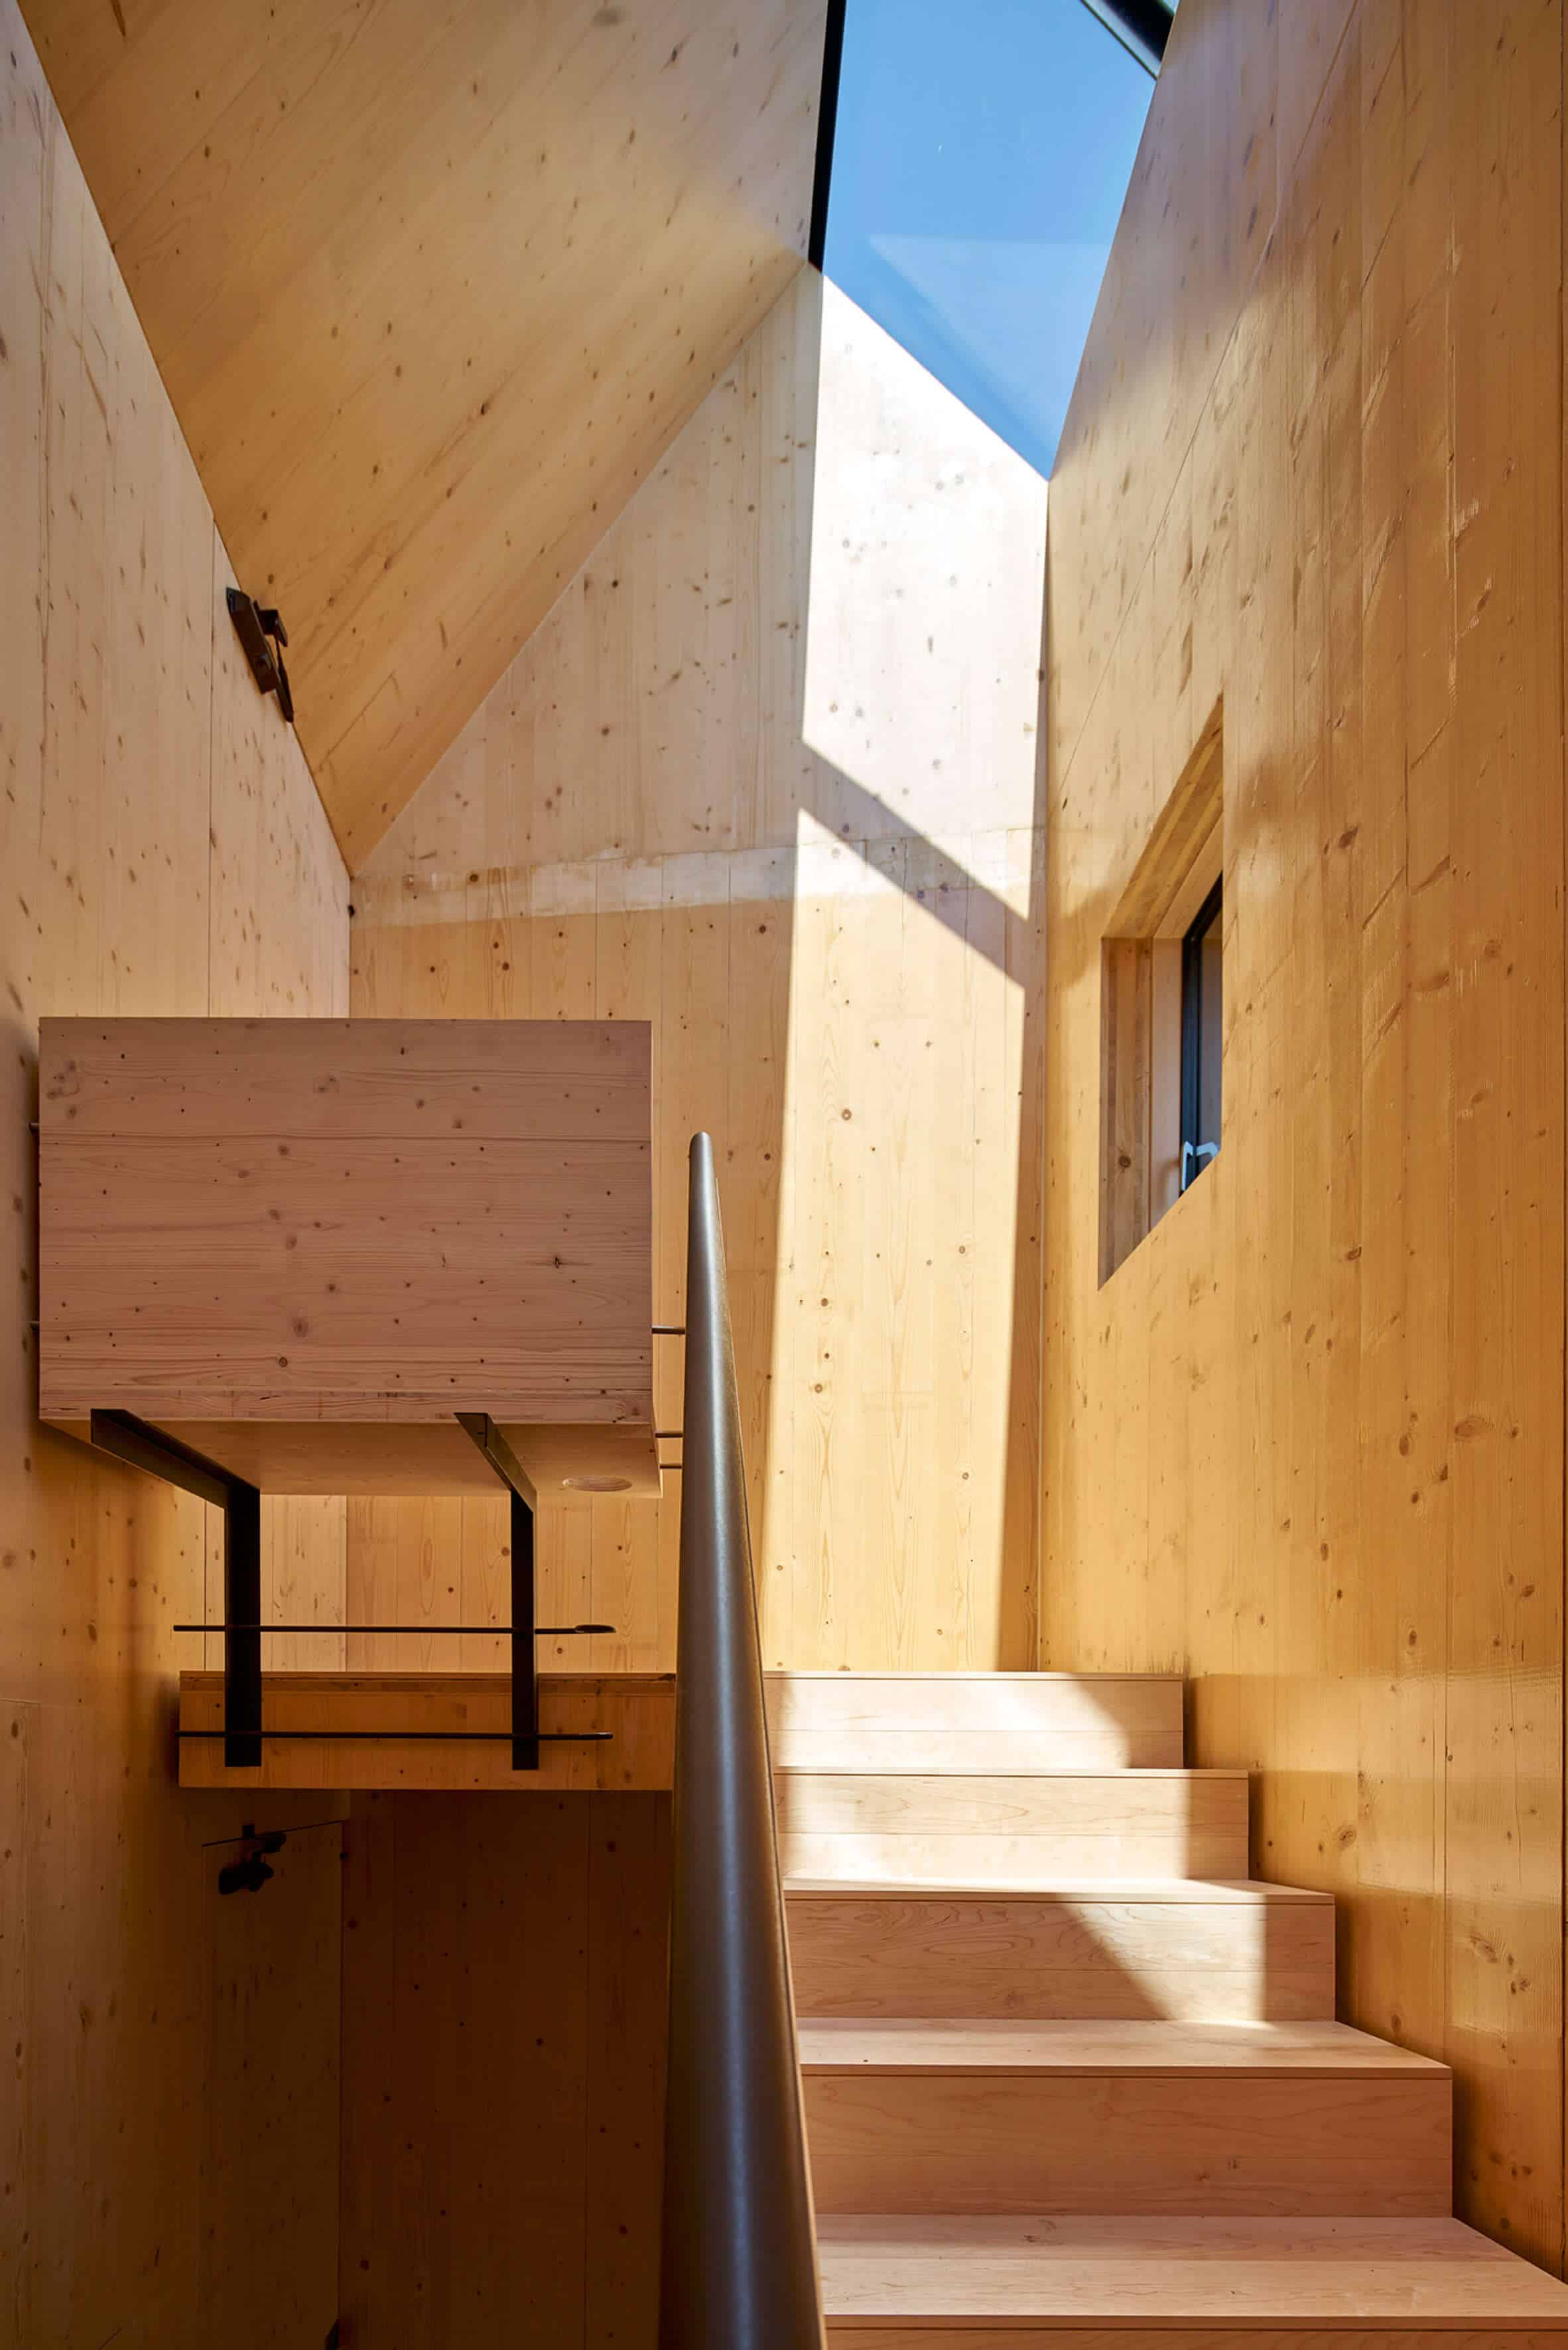 Cross Laminated Timber Wrapped in Brick by Amin Taha Architects 6